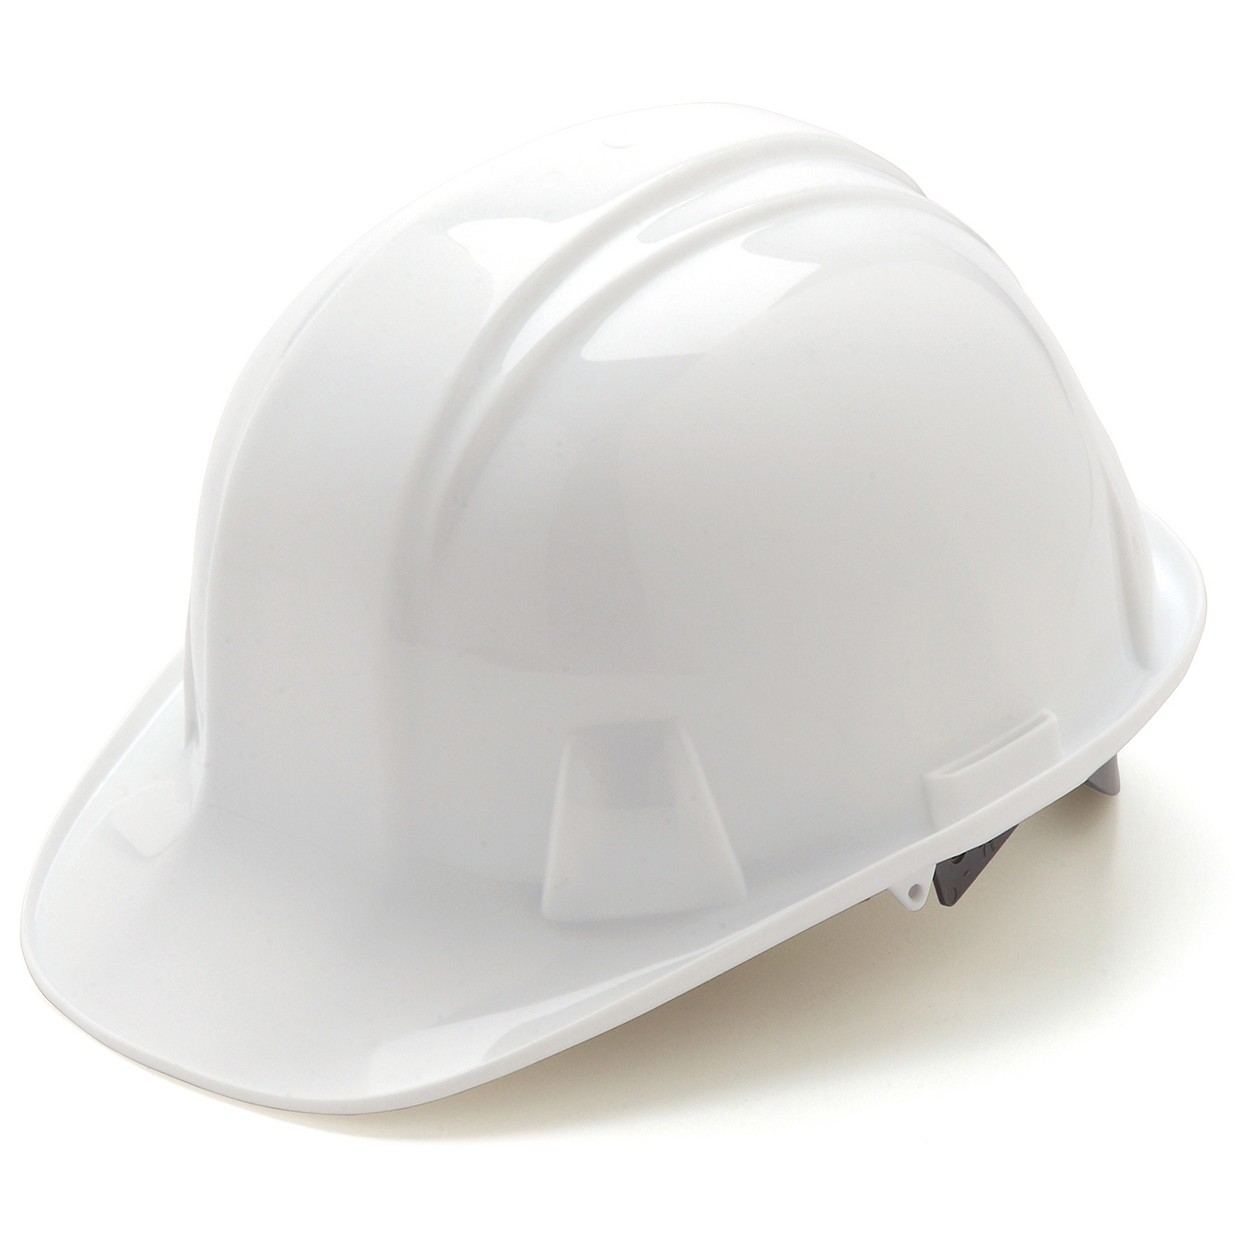 Durable Adjustable Head Protection Safety Vented Helmet HYCOPROT Wide Brim Hard Hat 6-Point Ratchet Suspension